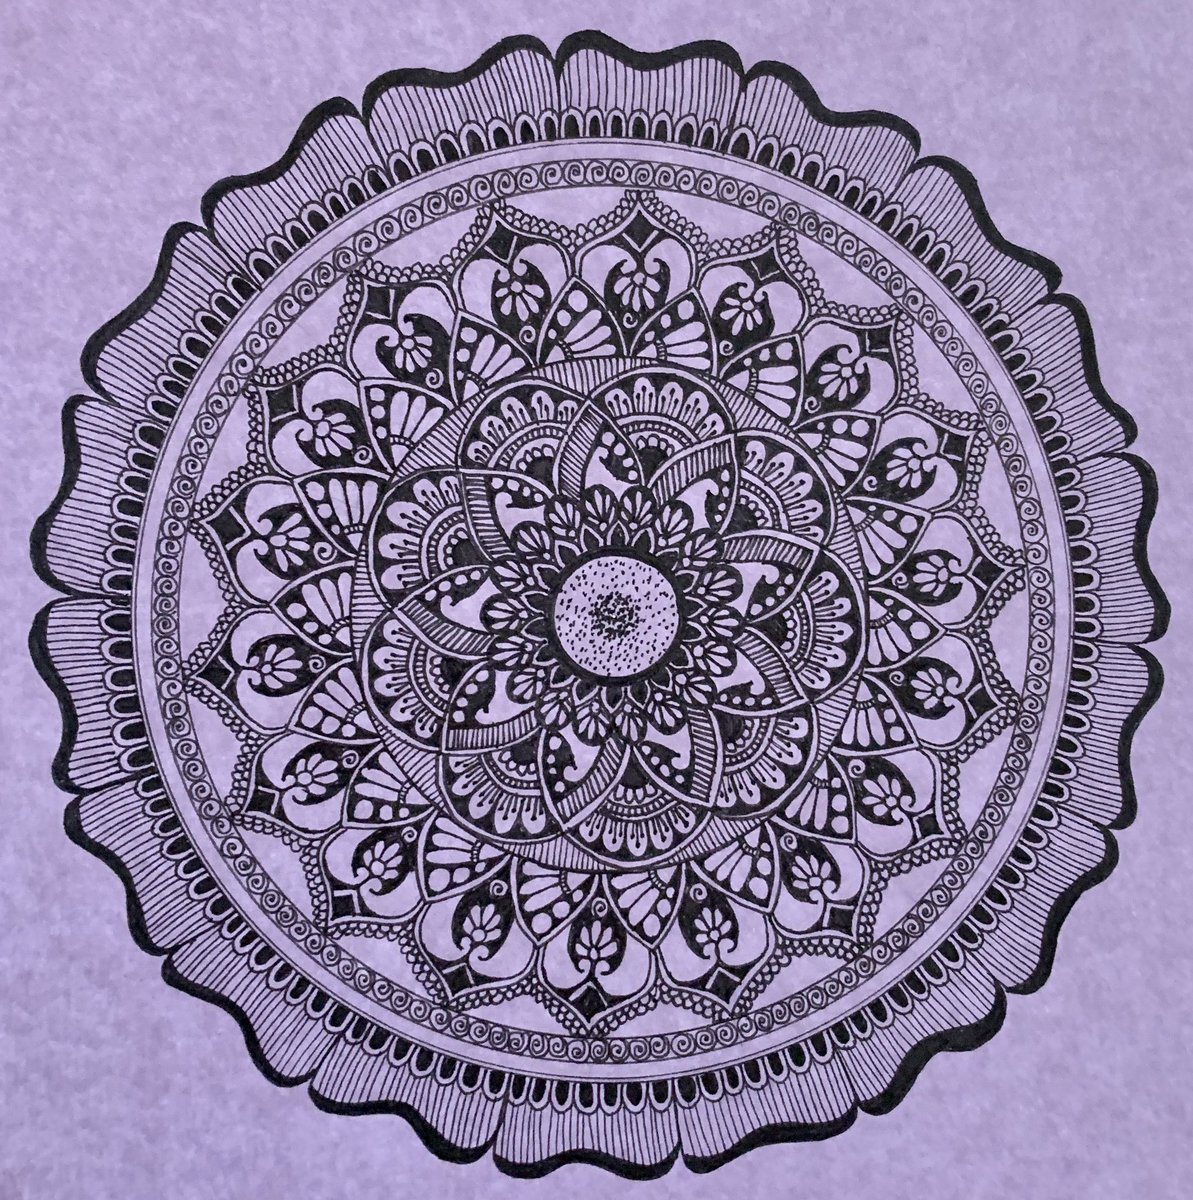 The color of royalty, elegance and grace. The evening sky 🌌 embraces it with open arms. Filled in the fragrance of lavender - Violet💜  
#mandala #mandaladrawing #art #violet #mandalaoncolors